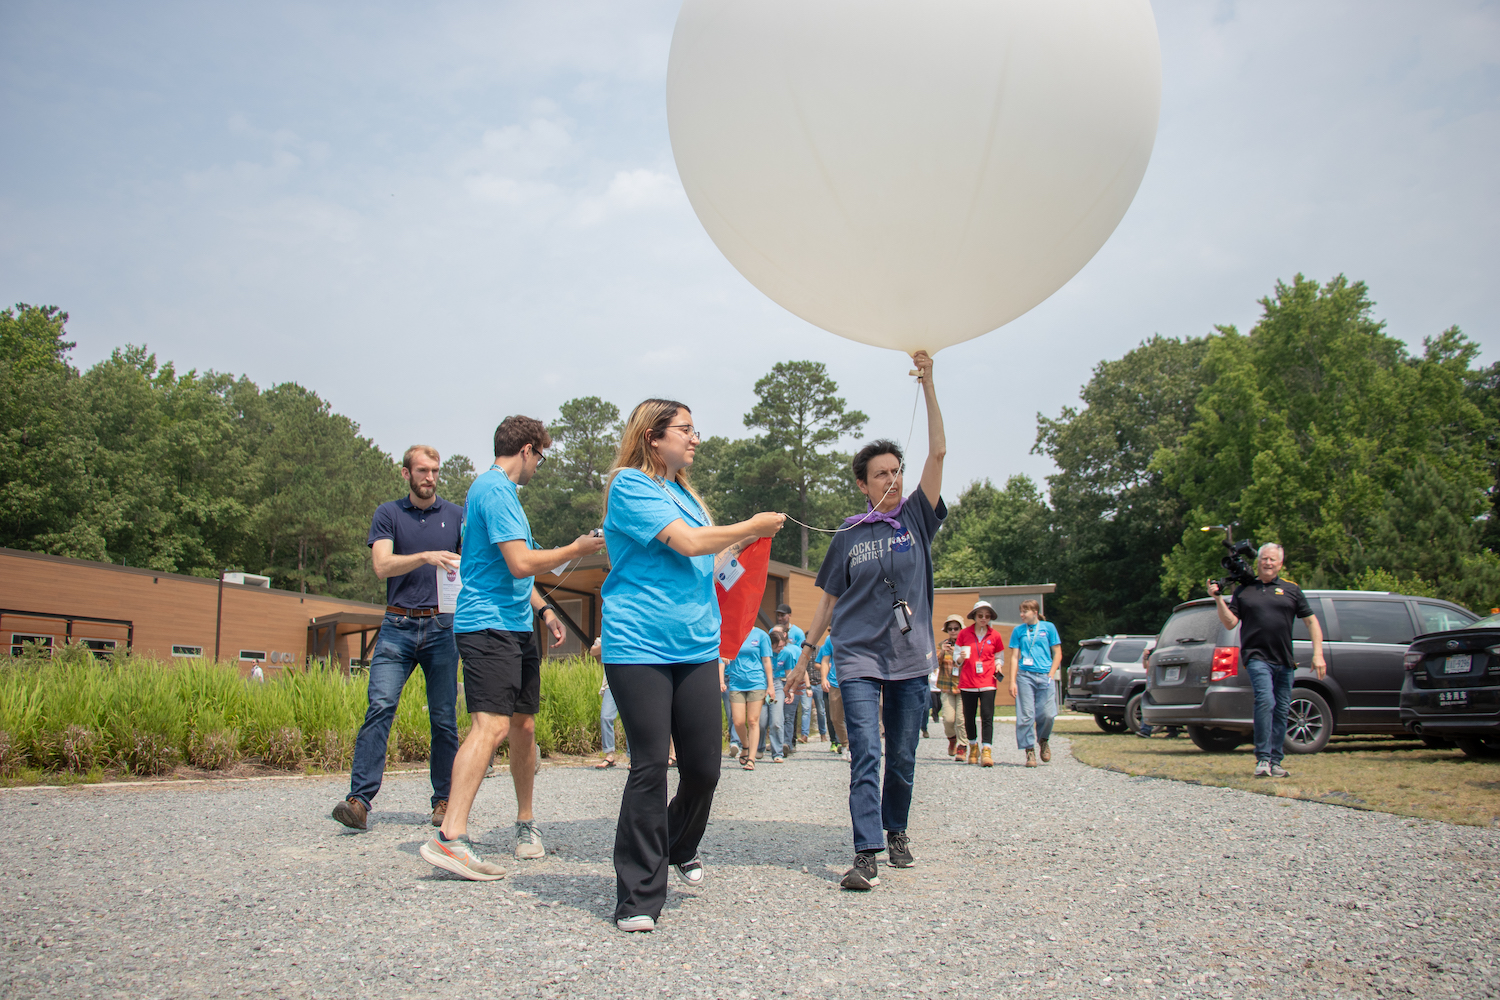 A group of students and advisors walk along a concrete path, a cloudy blue sky and green trees in the background. An advisor, centered in the image, is holding a very large, white, spherical balloon above her head.